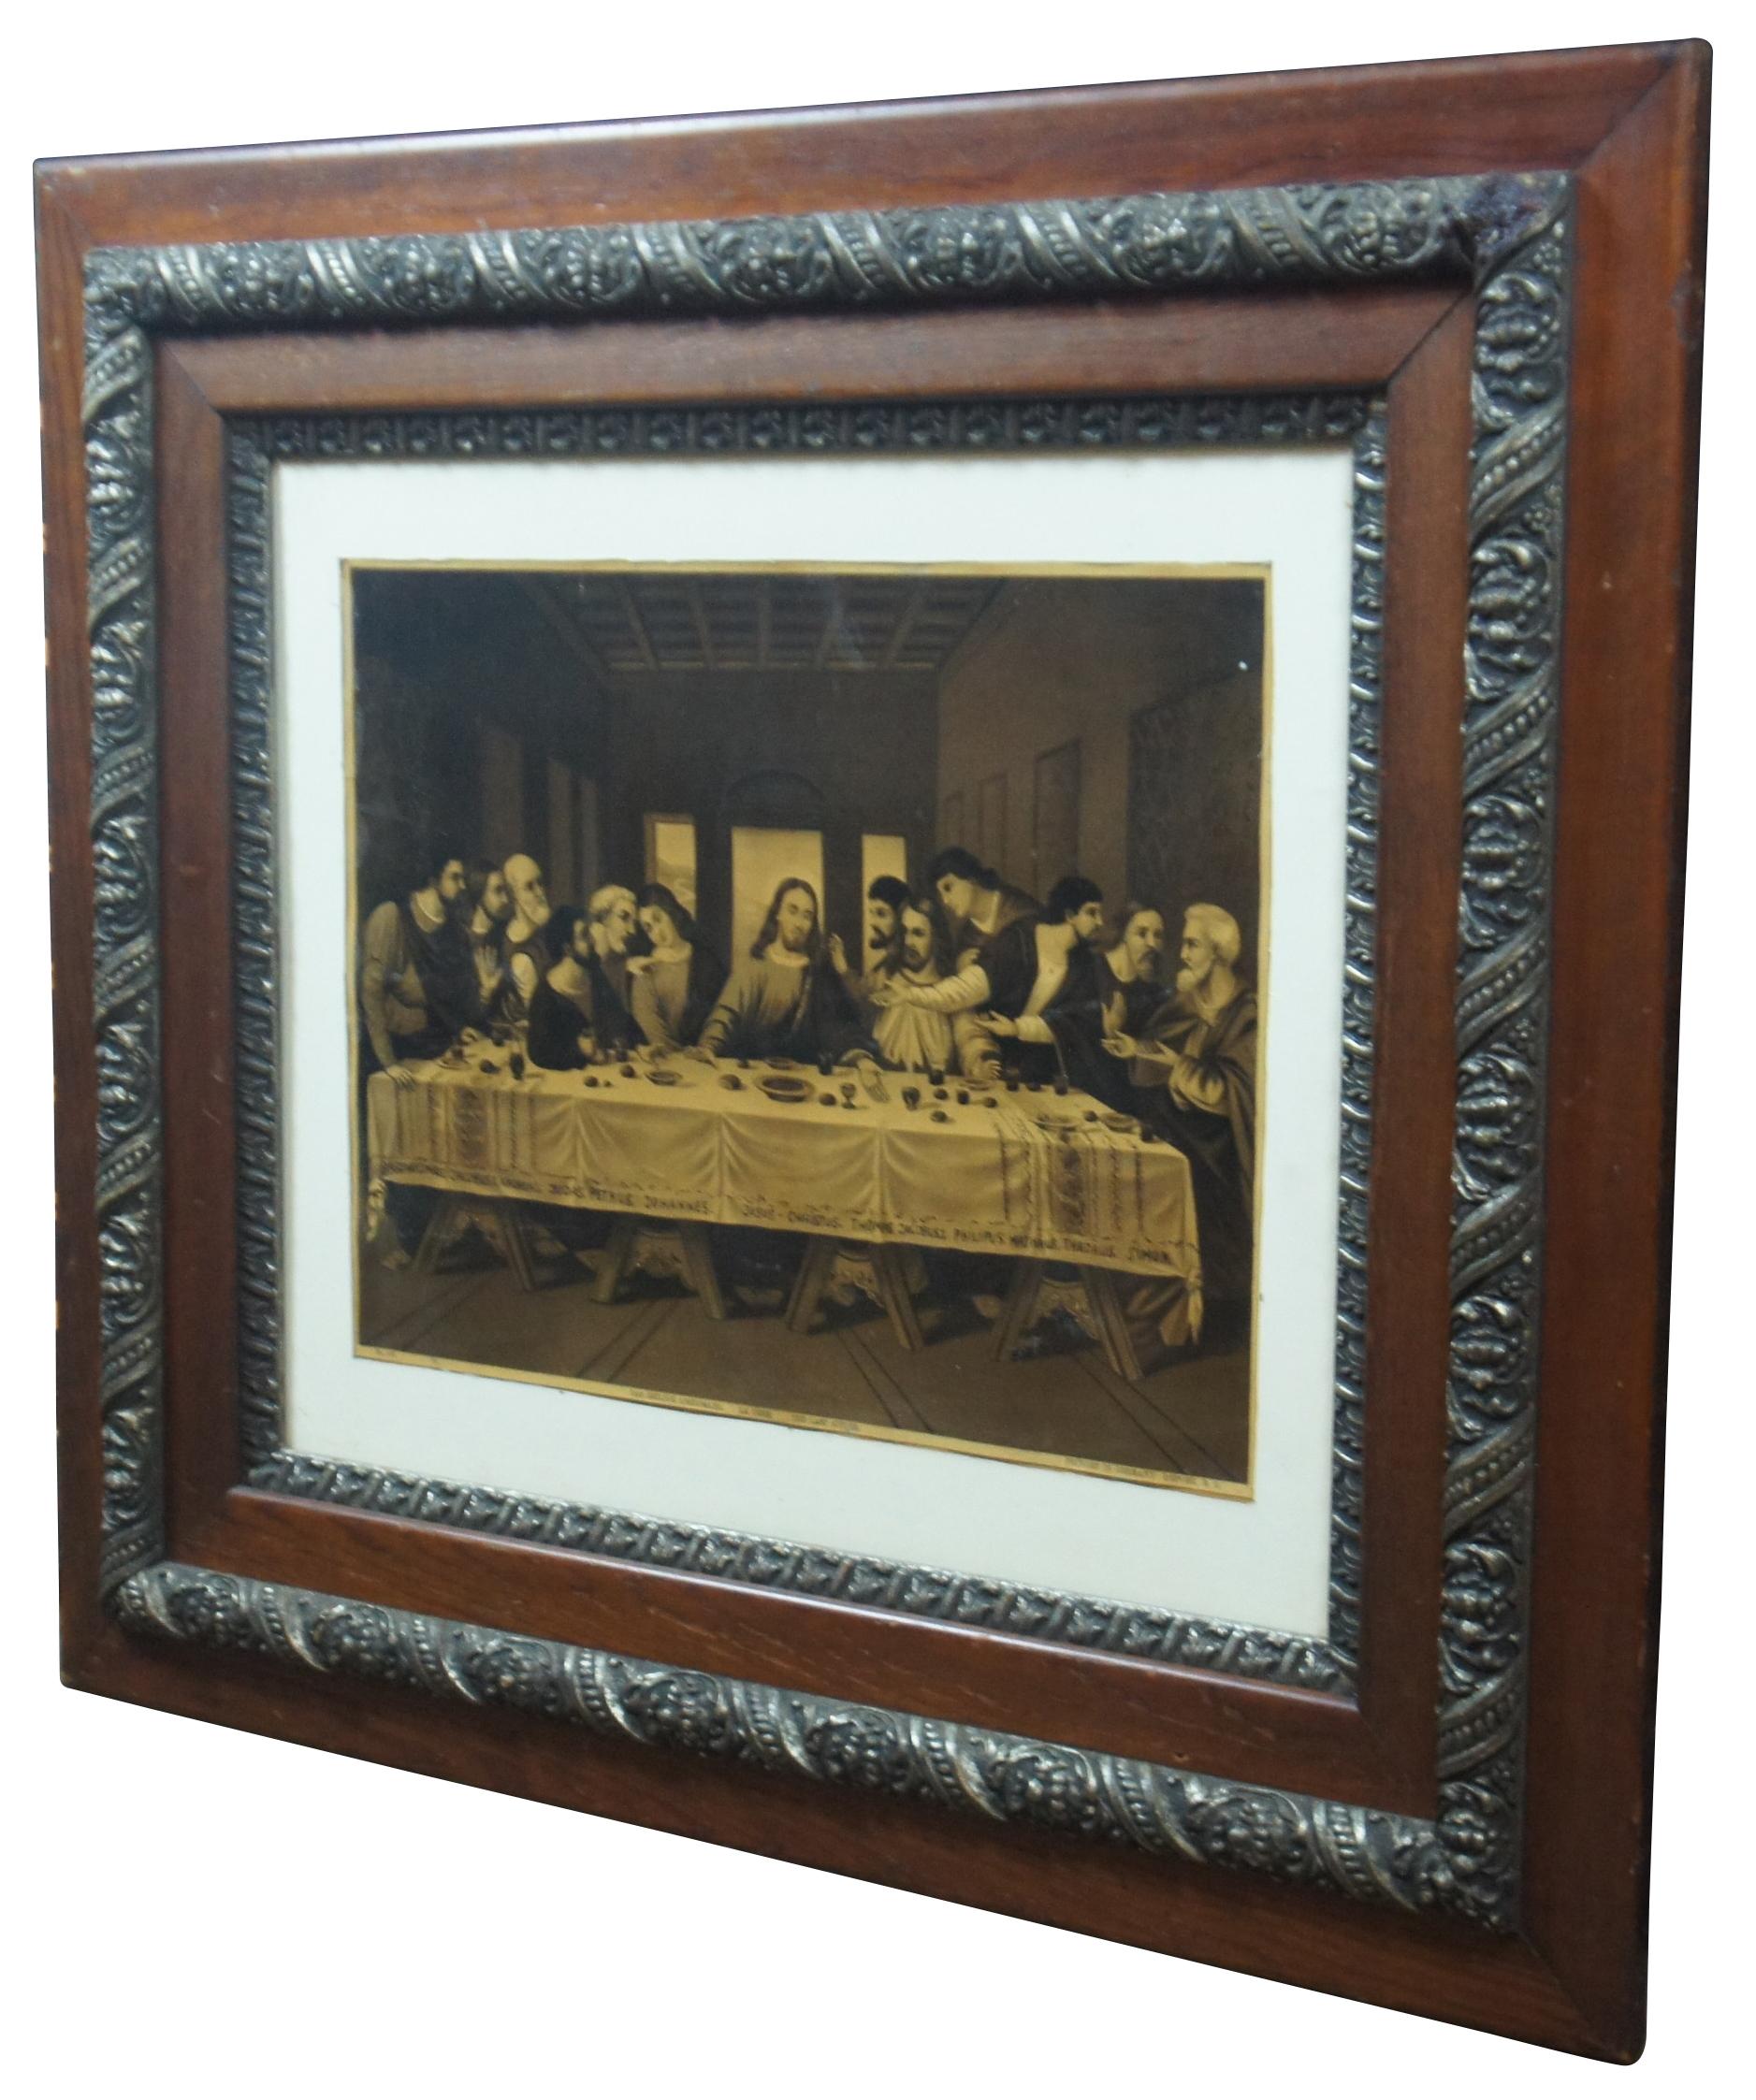 Early 20th century lithograph print of R. Tesar’s interpretation of Leonardo da Vinci’s “The Last Supper.” Printed in Germany. B. G. Depose. Placed in a nice period Victorian oak frame.

Measures: 35